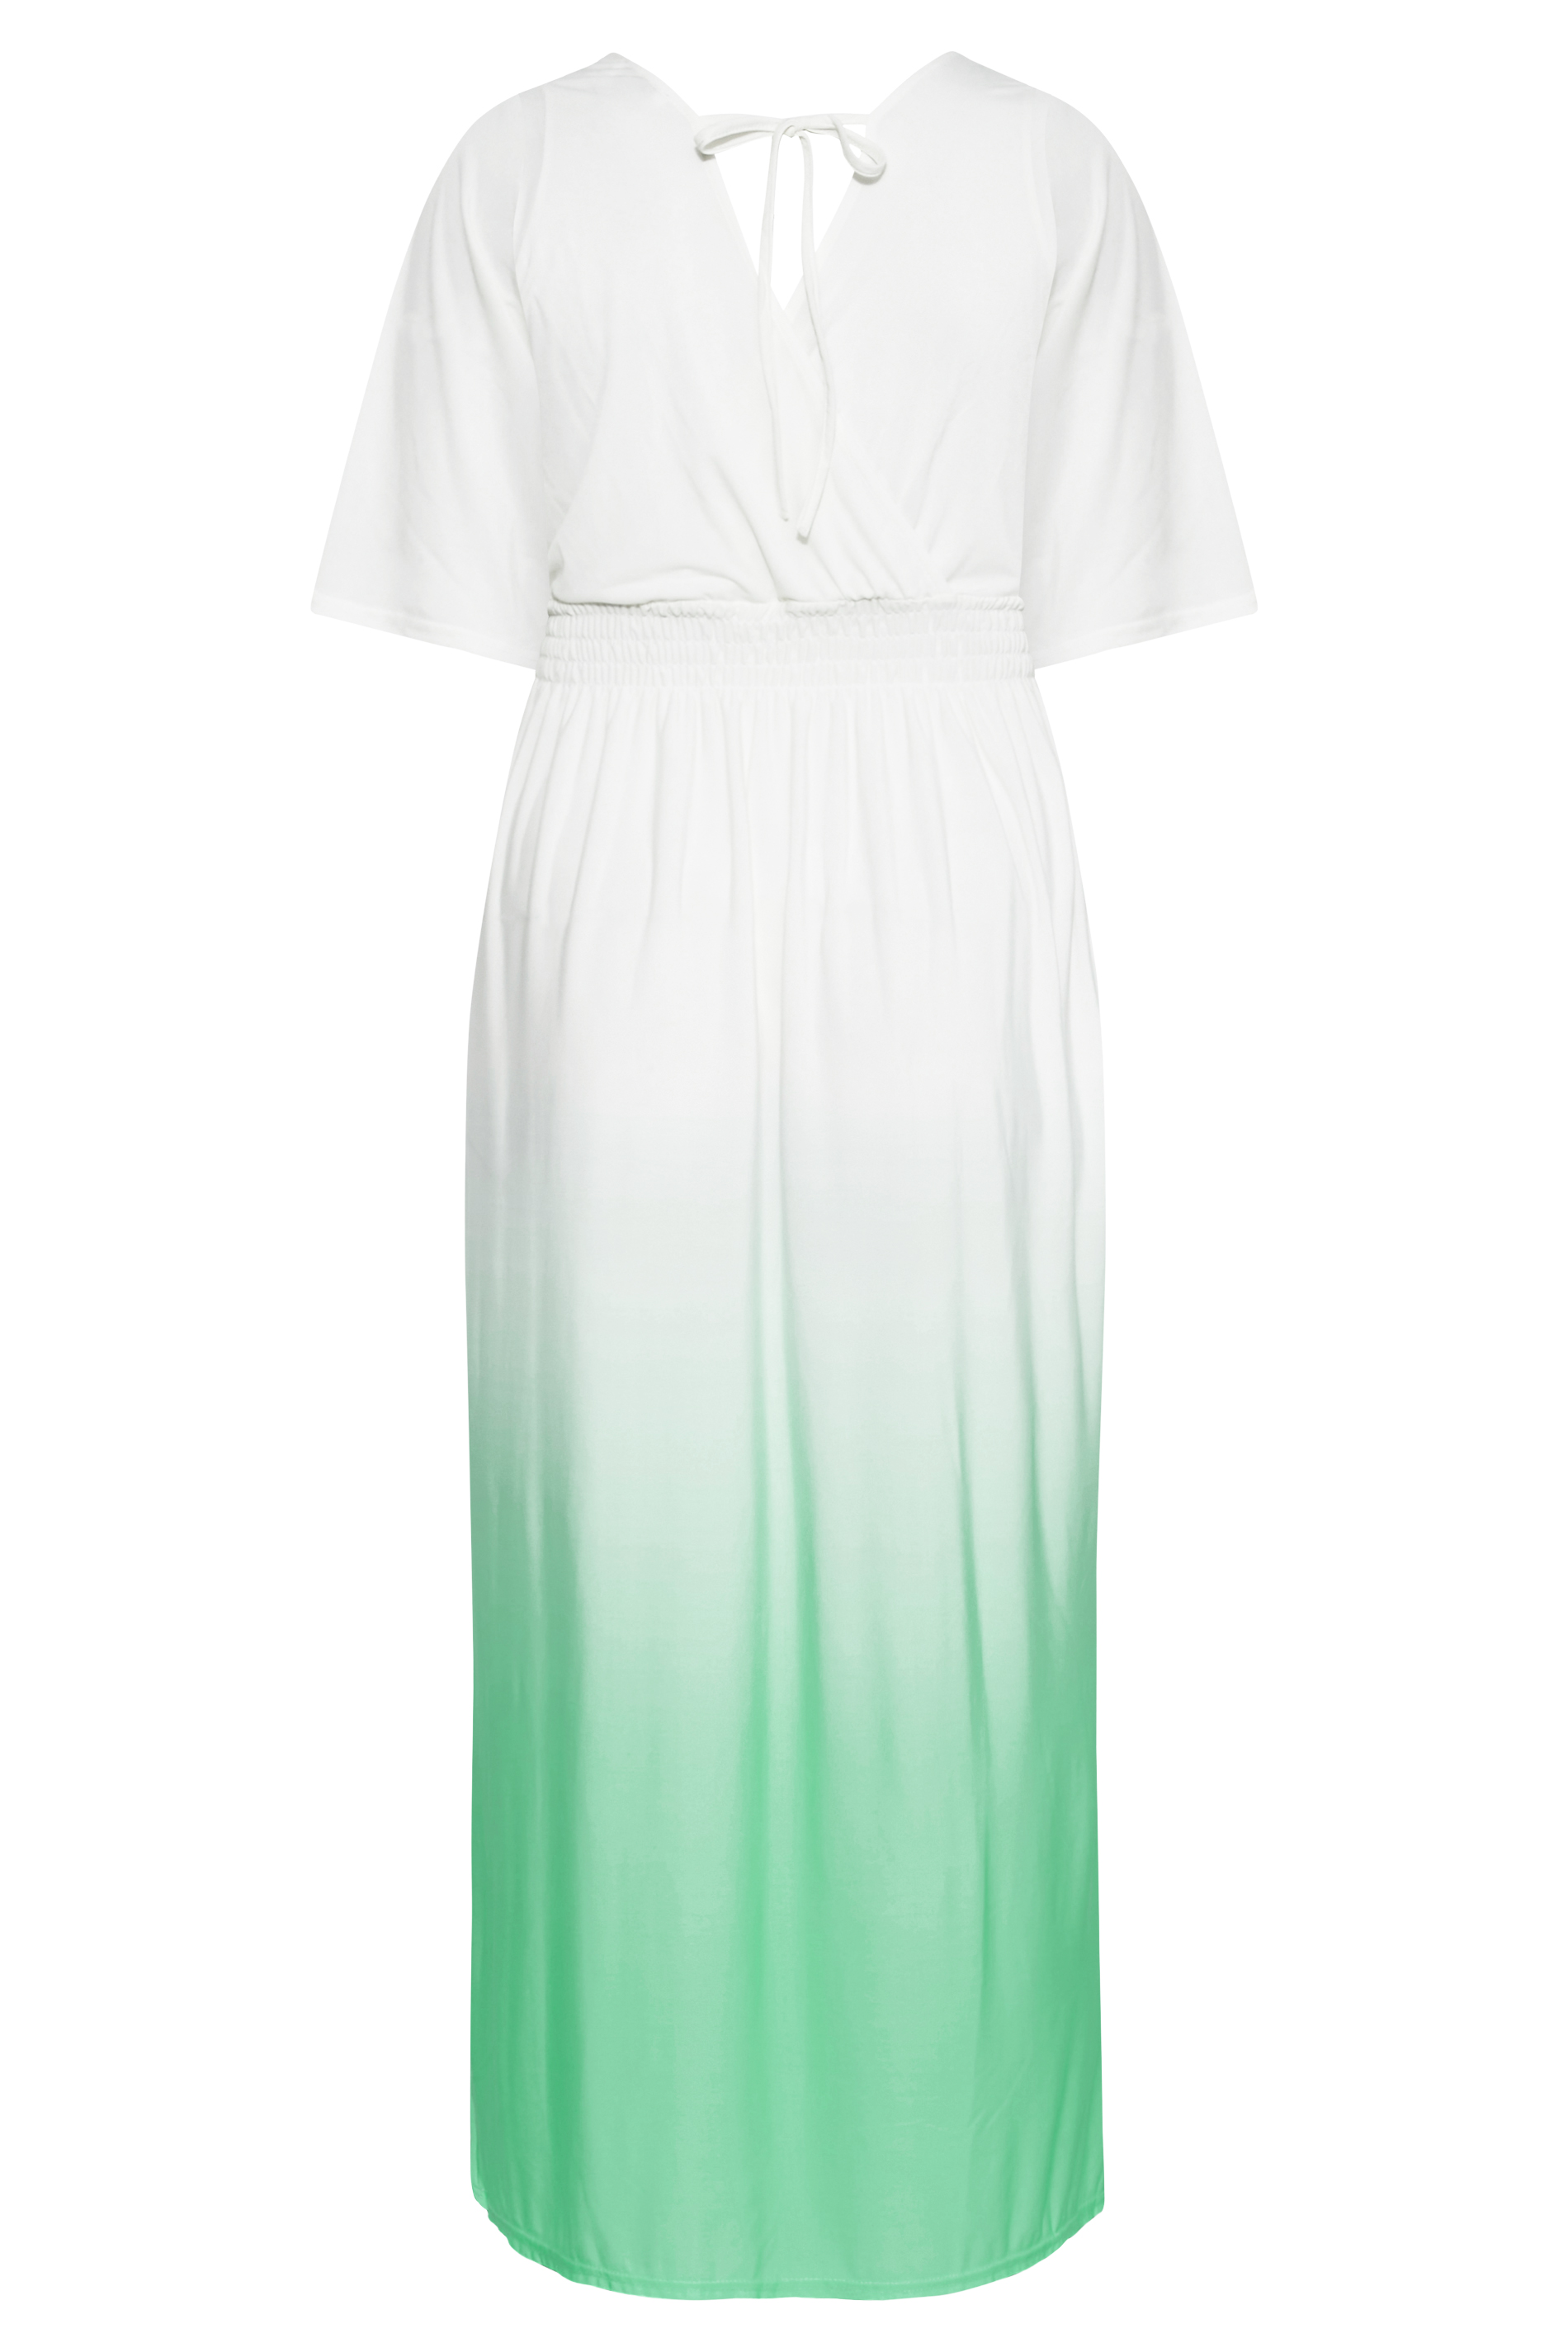 Robes Grande Taille Grande taille  Robes Longues | YOURS LONDON - Robe Blanche Maxi Ombré Vert - JO31229